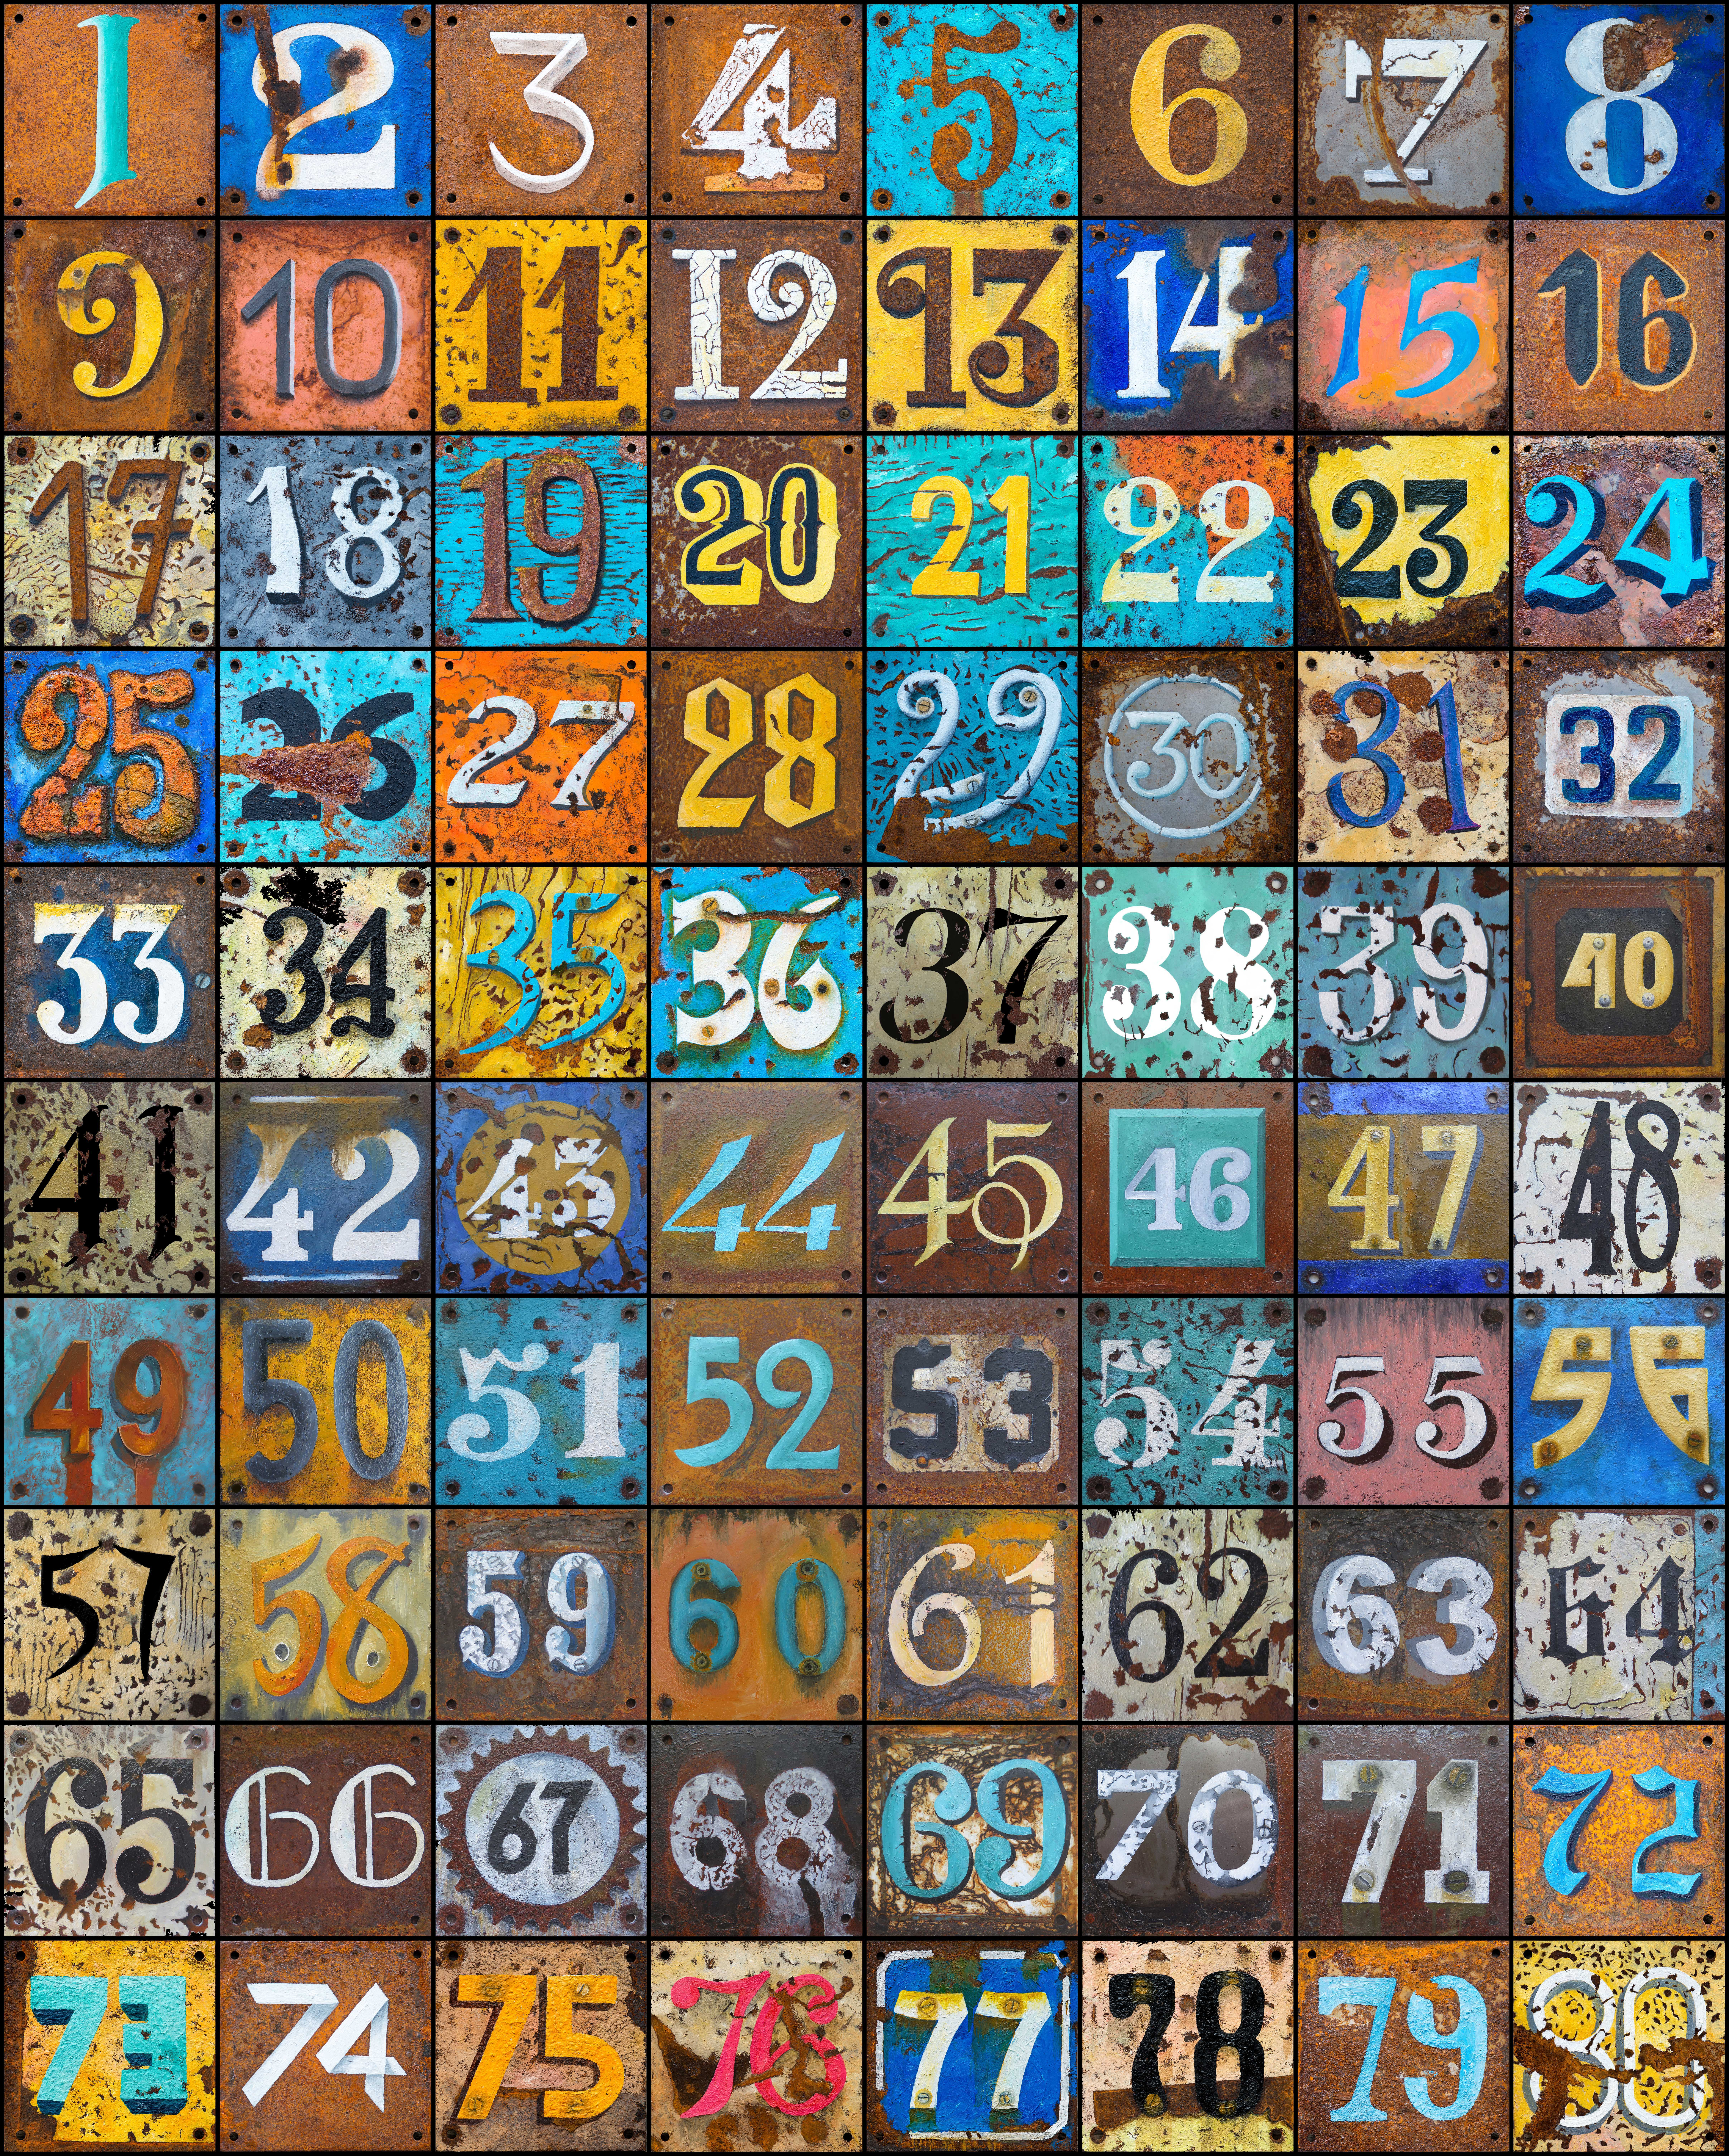 multicolored, texture, motley, numbers, rust, textures cellphone